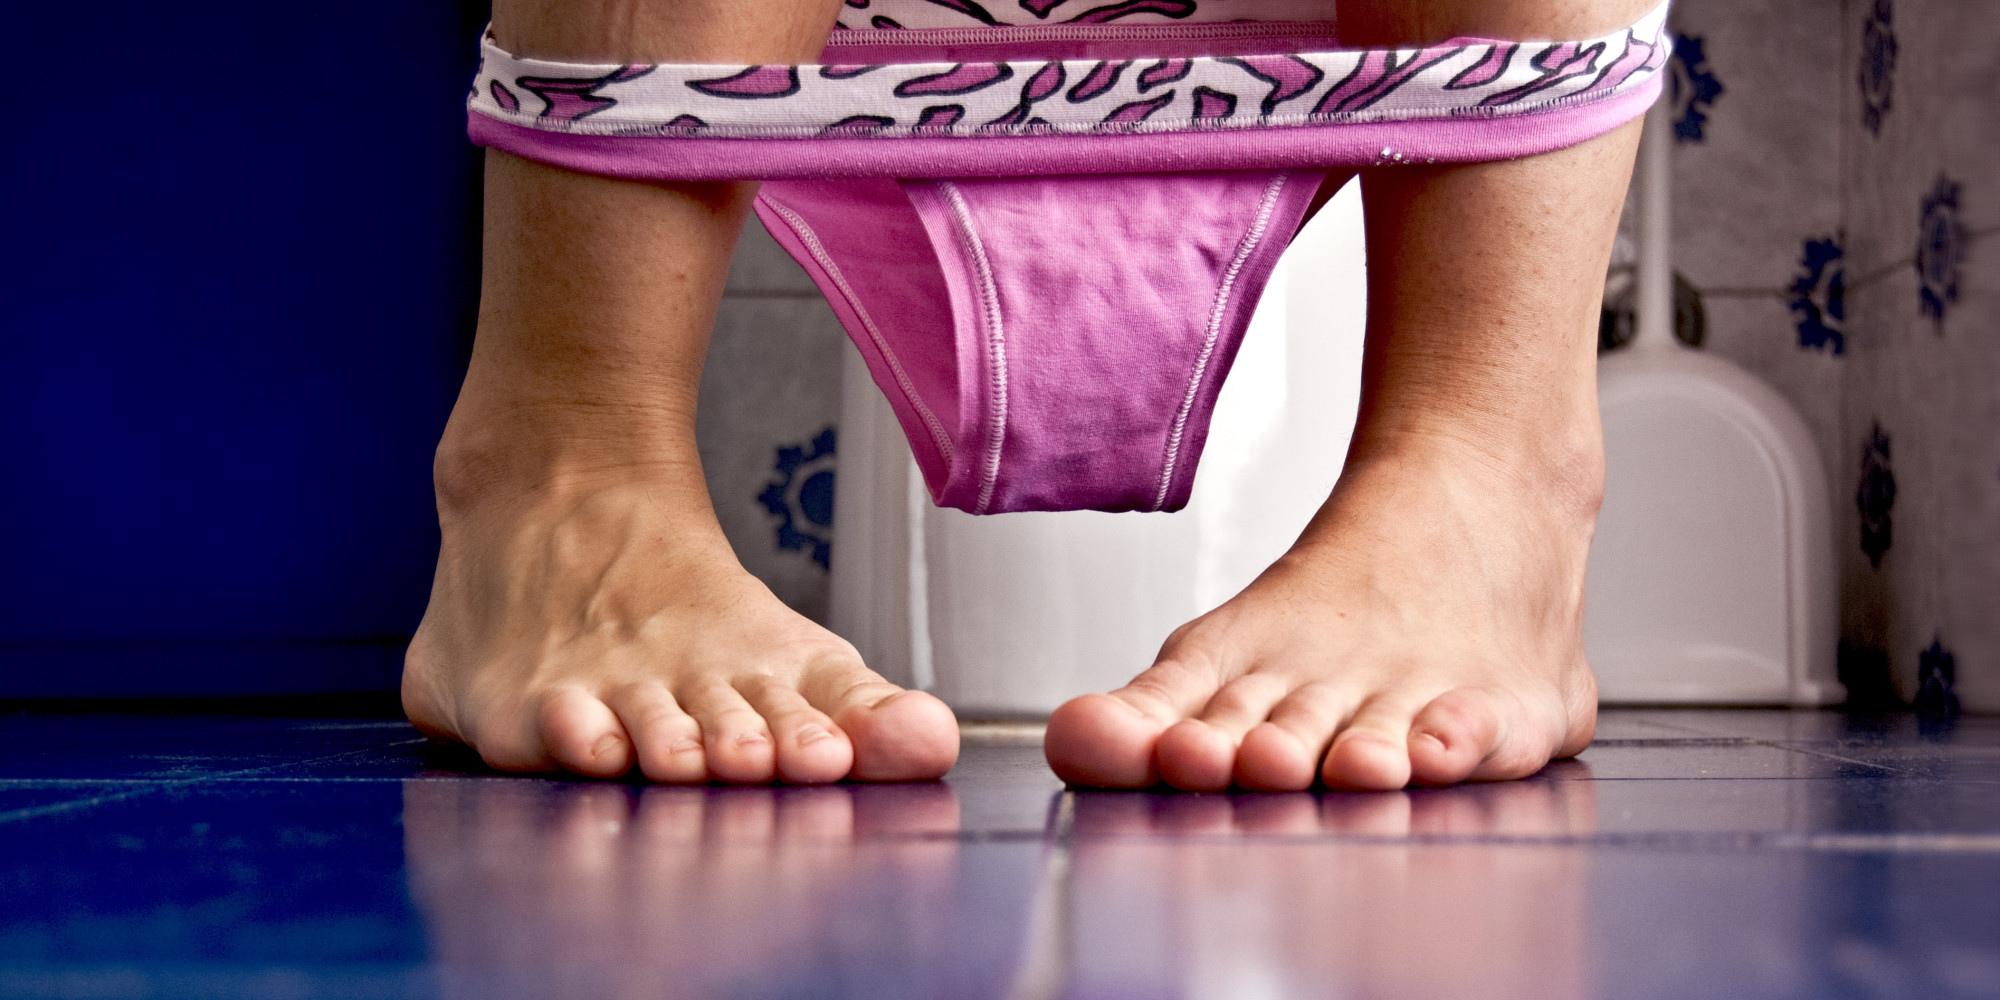 Patient Woke Up From Colonoscopy Wearing Pink Panties Lawsuit HuffPost